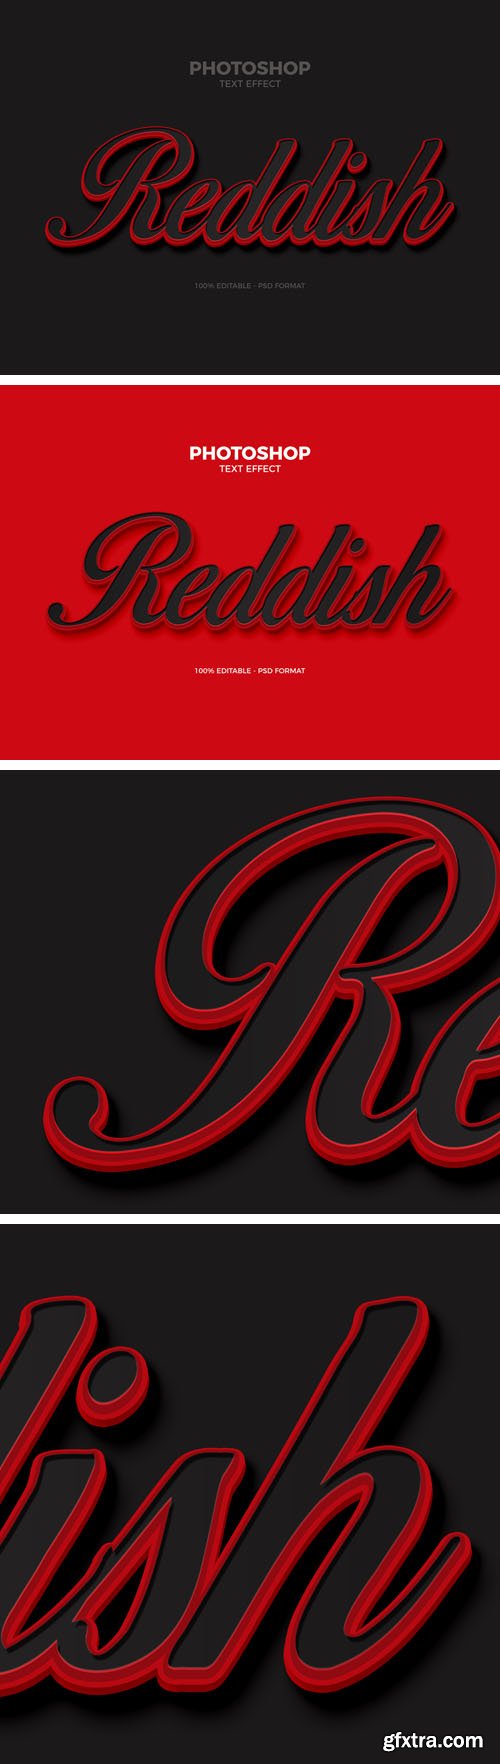 Reddish Text Effect for Photoshop